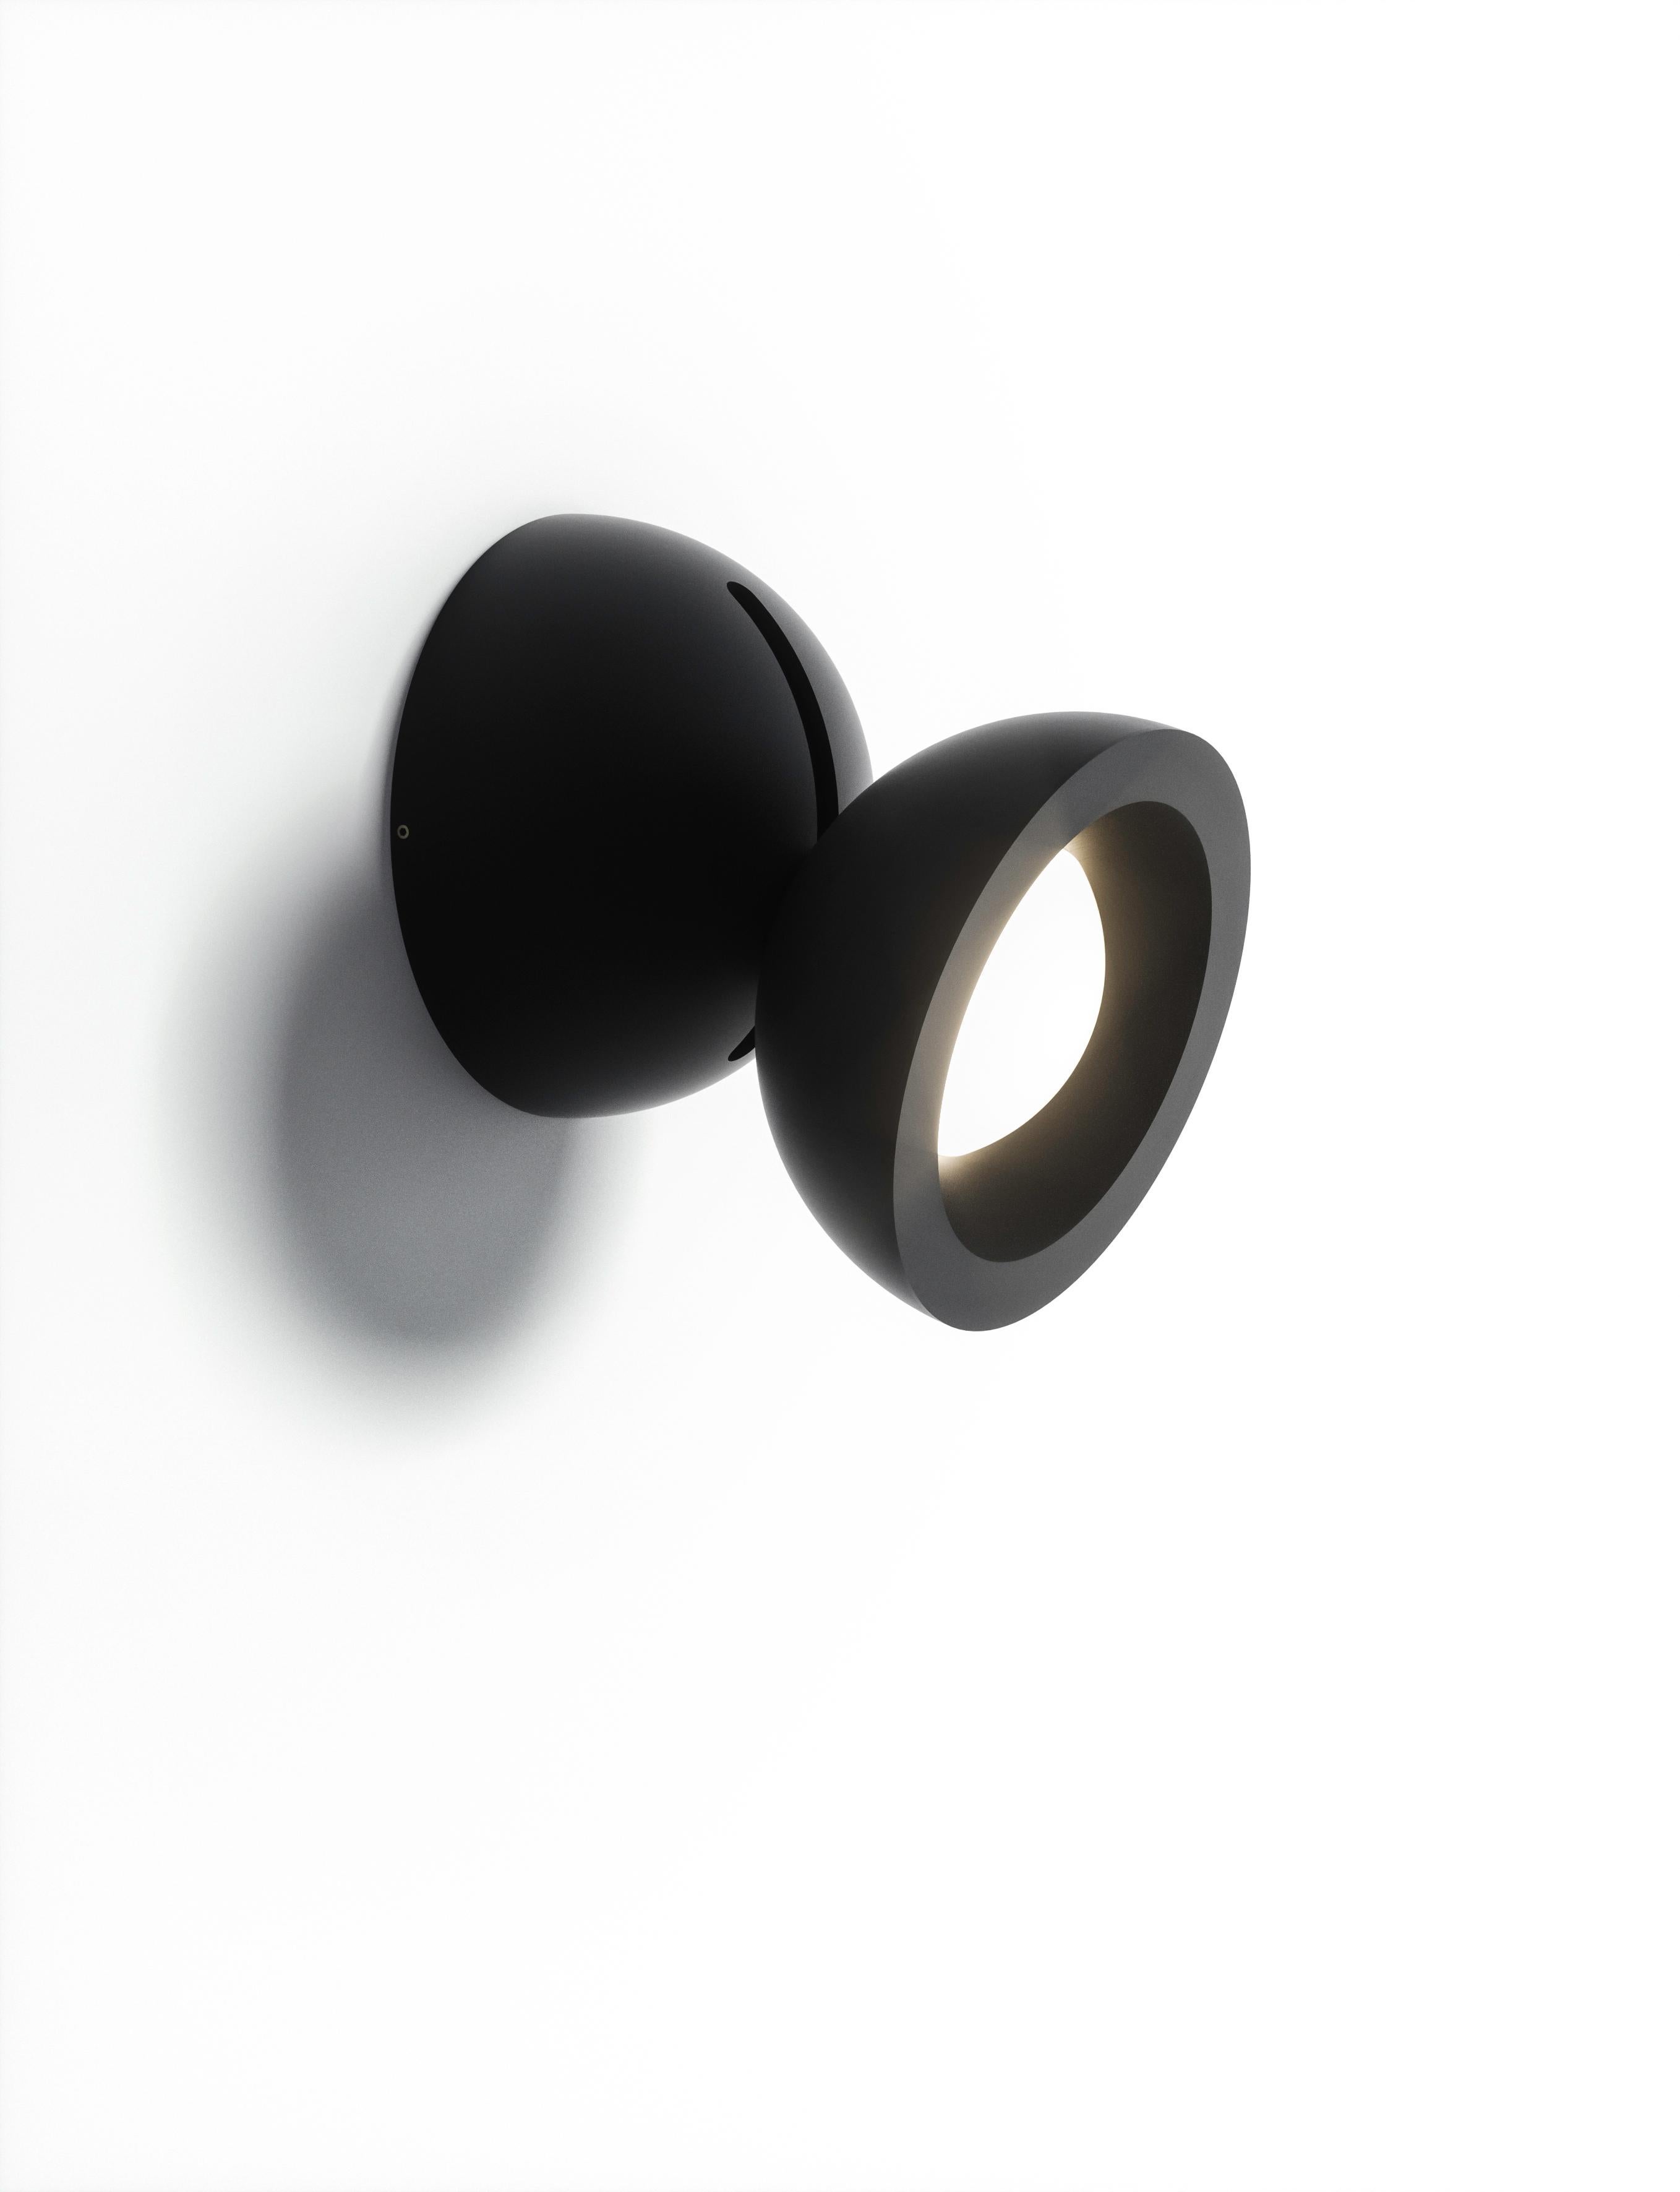 Axolight DoDot Wall/ Ceiling Light in Black Aluminum by Simone Micheli

DoDot, the latest creation of architect and designer Simone Micheli is the new adjustable lamp by Axolight, suitable for ceiling and wall

Compact and performing, DoDot is made